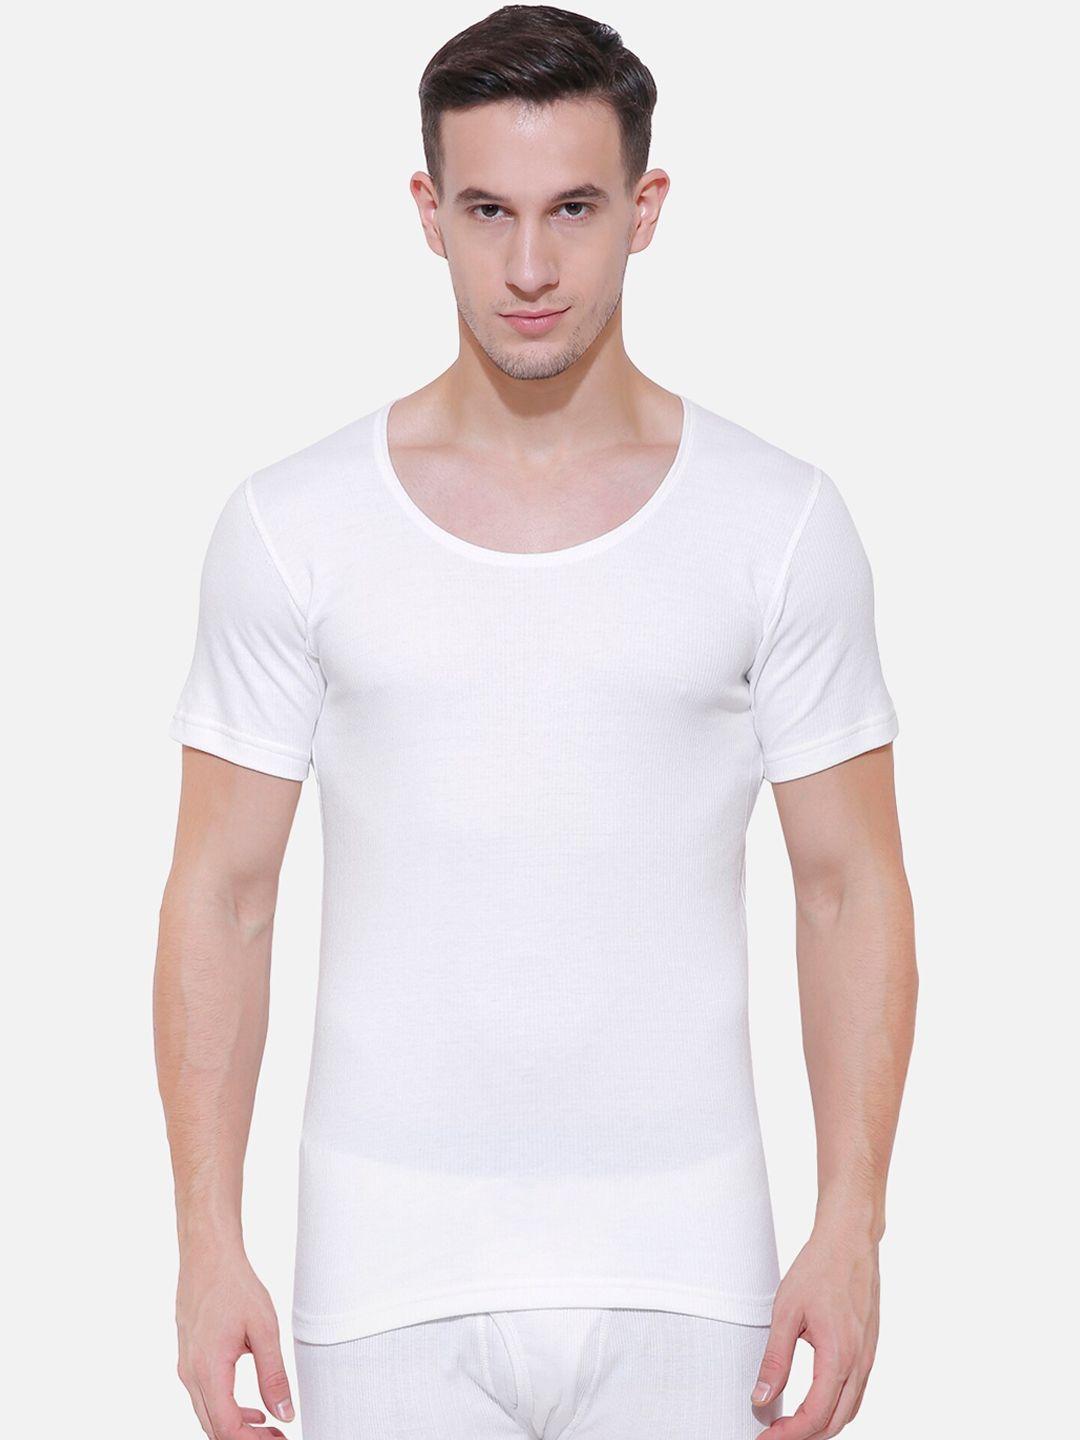 bodycare-insider-men-off-white-solid-thermal-top